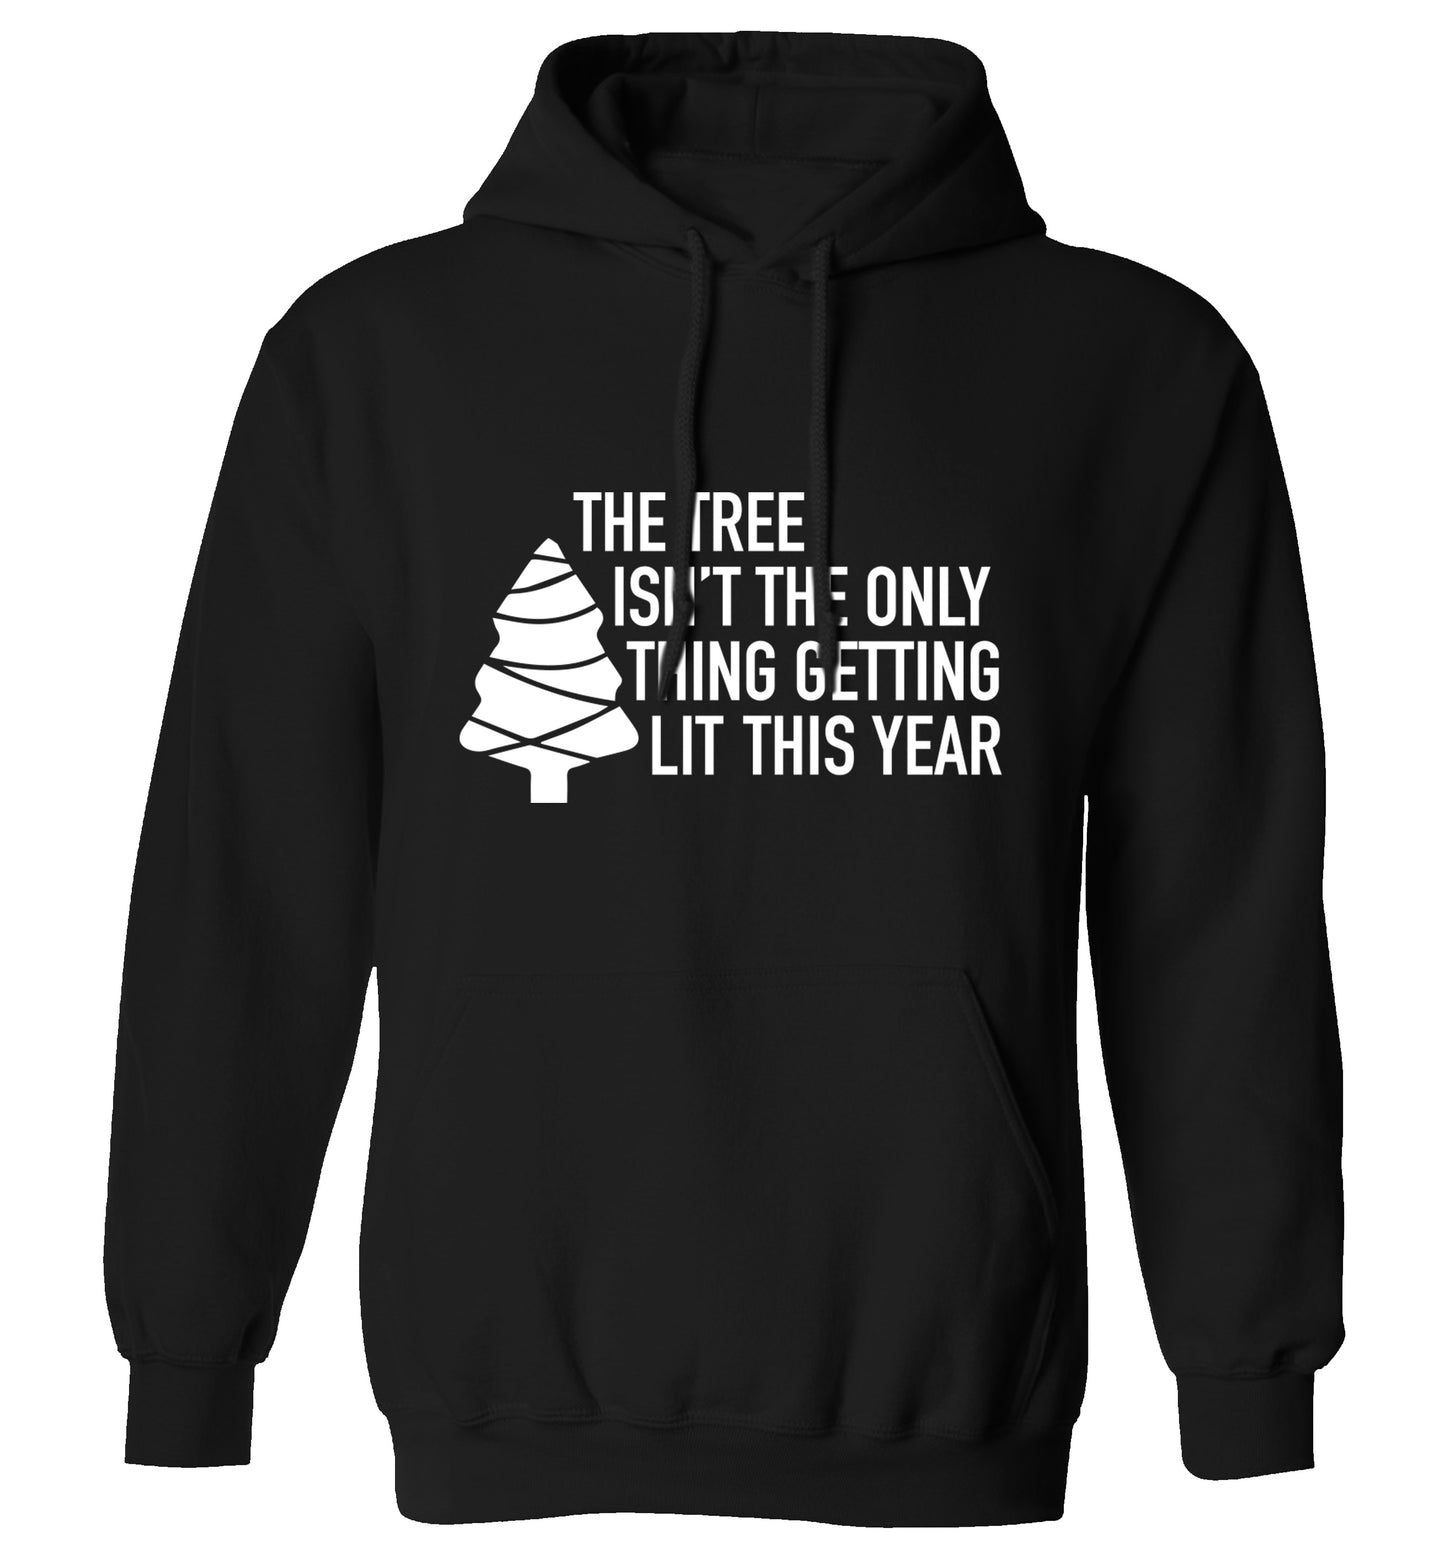 The tree isn't the only thing getting lit this year adults unisex black hoodie 2XL